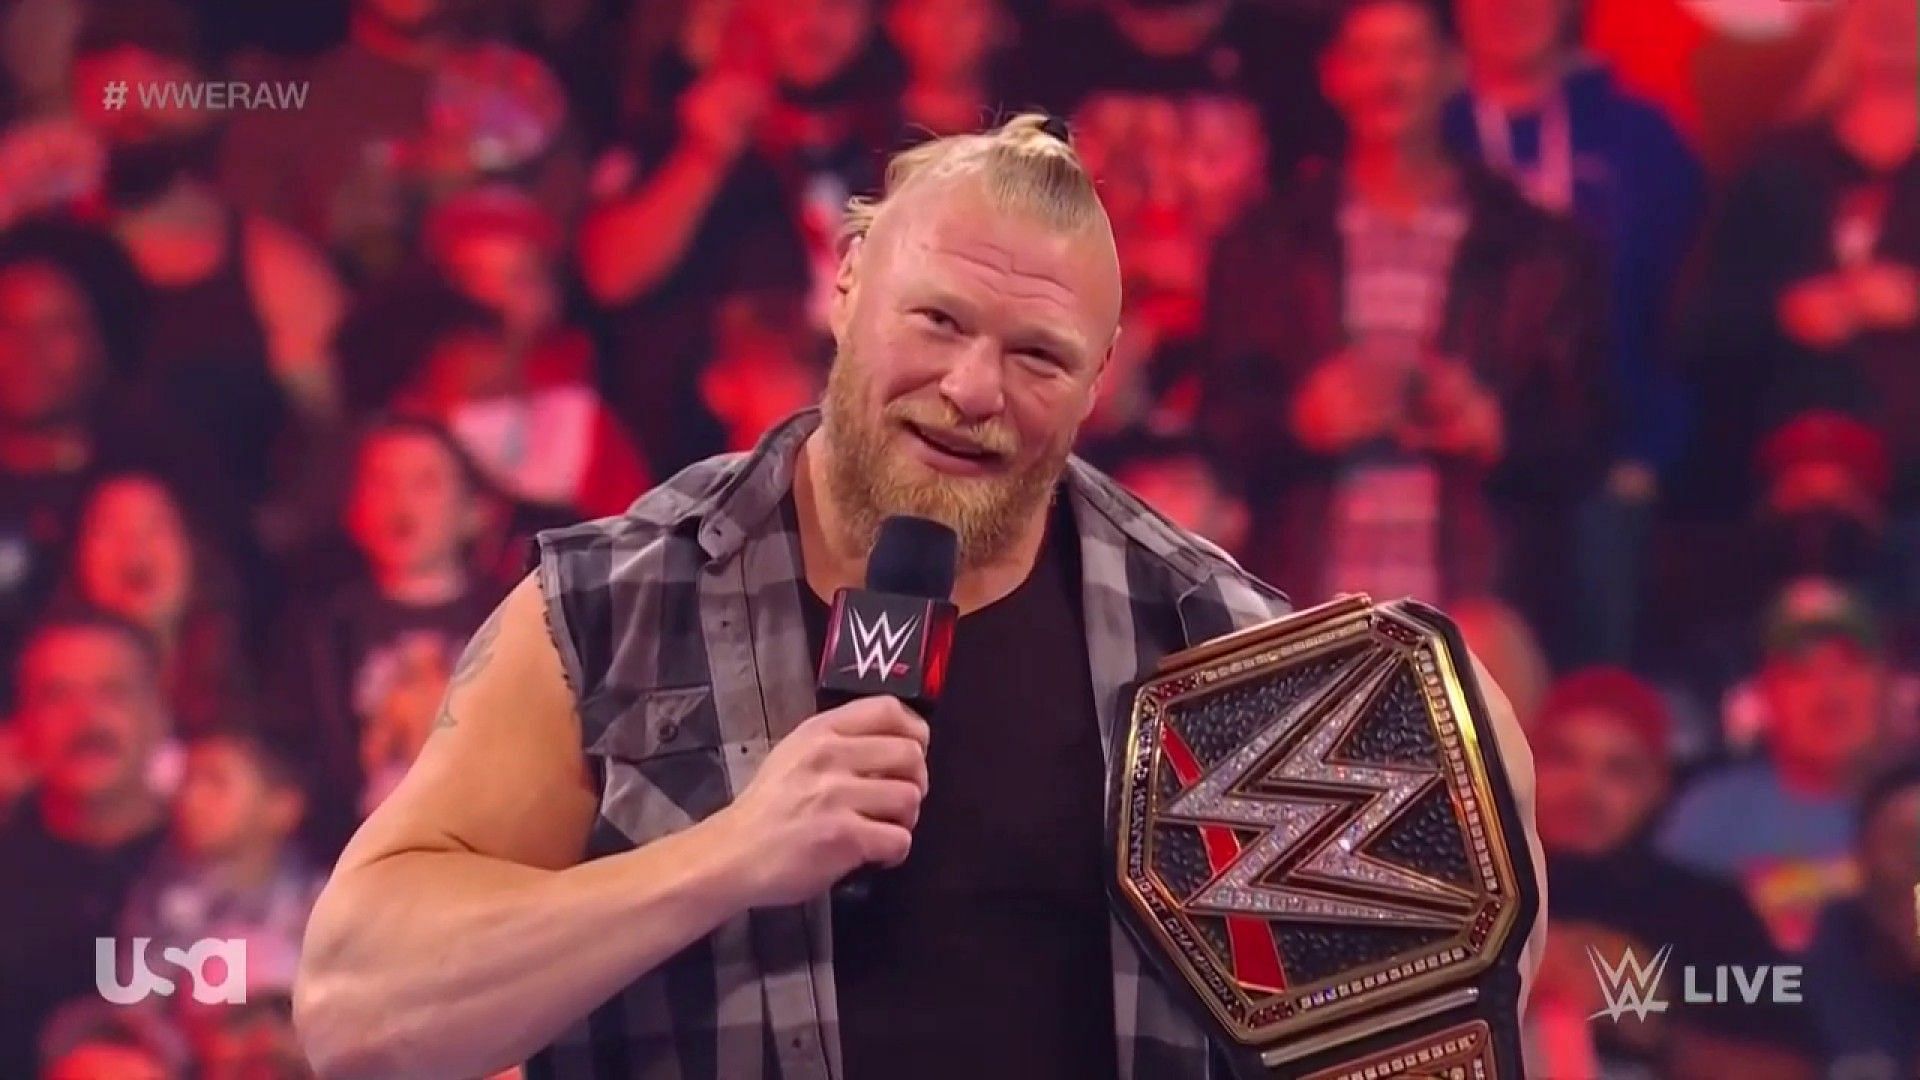 Brock Lesnar is the new WWE Champion